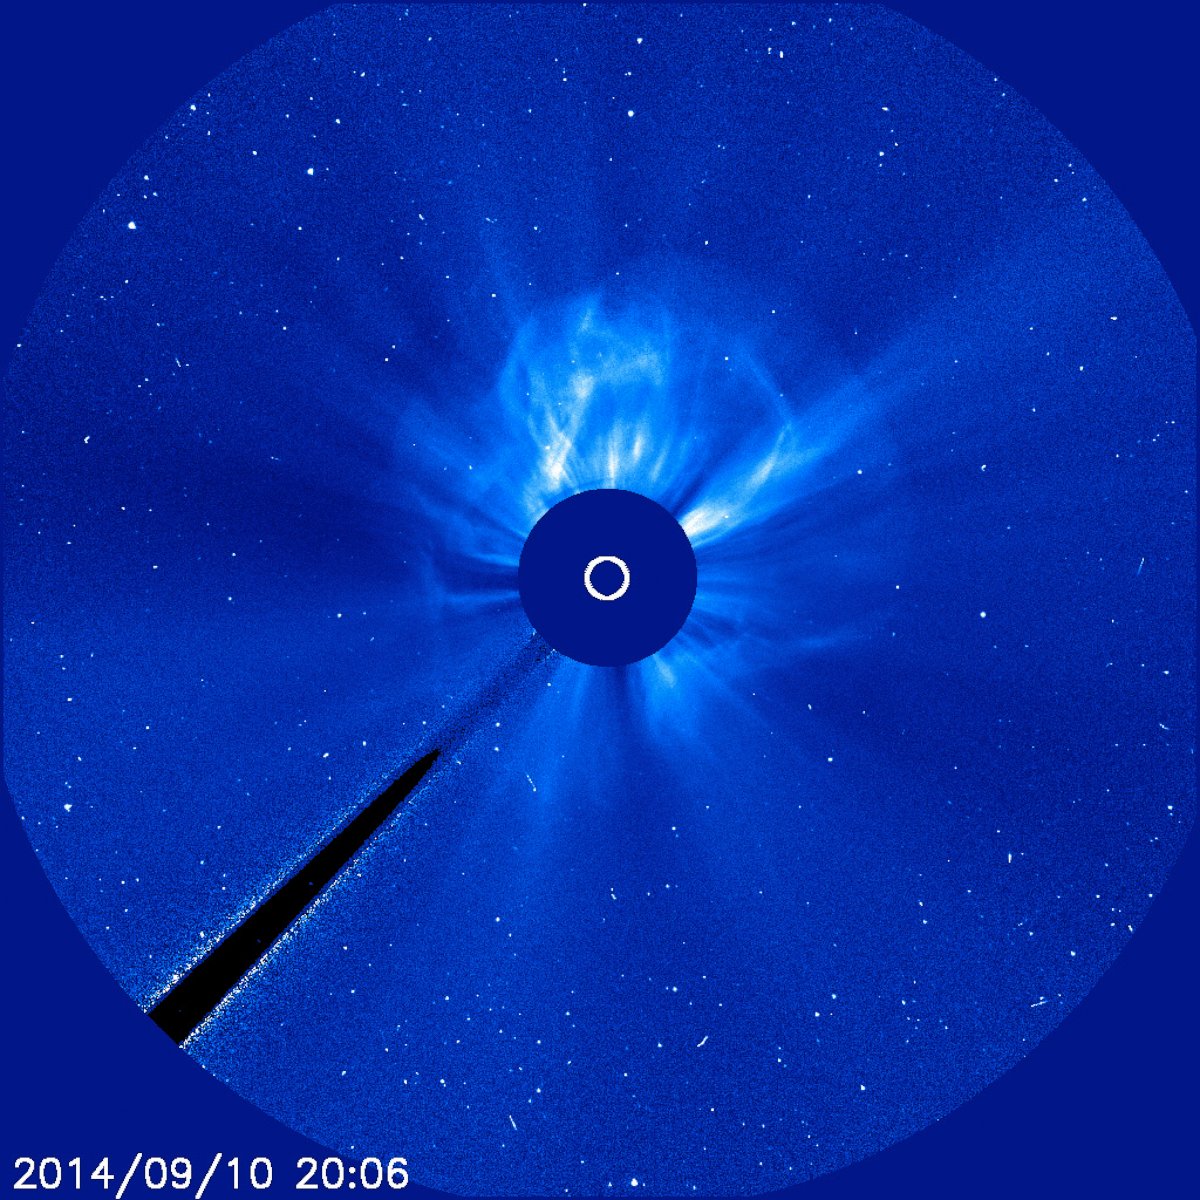 PHOTO: The coronal mass ejection associated with a Sept. 10, 2014, X1.6 flare is visible in this image from the joint European Space Agency and NASA's Solar and Heliospheric Observatory.